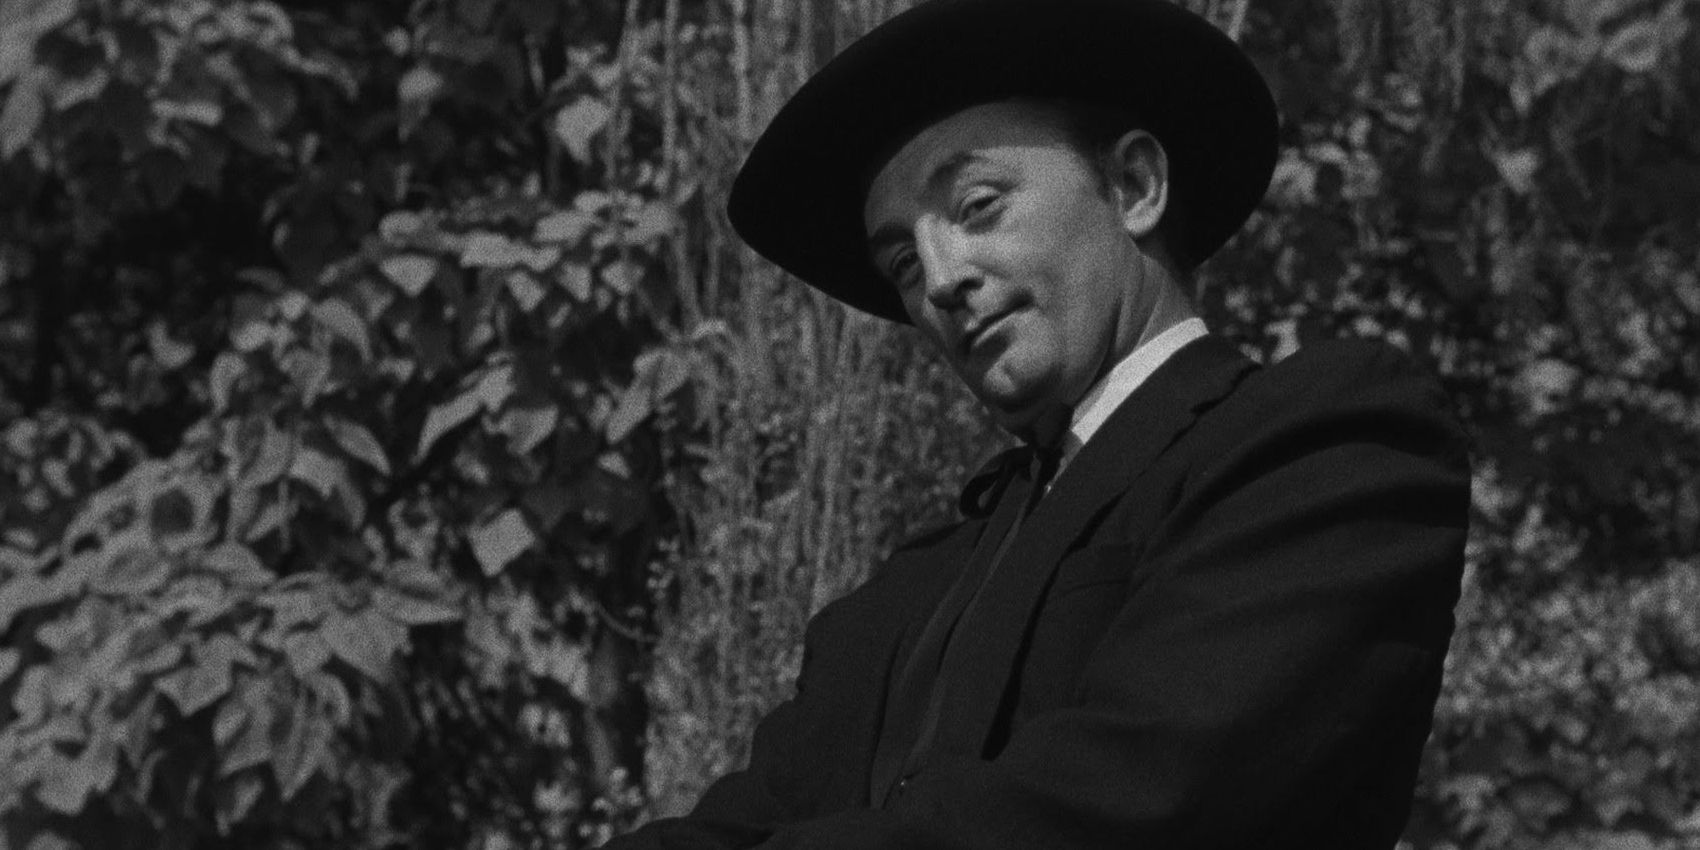 Robert Mitchum with an eyebrow raised in The Night of the Hunter